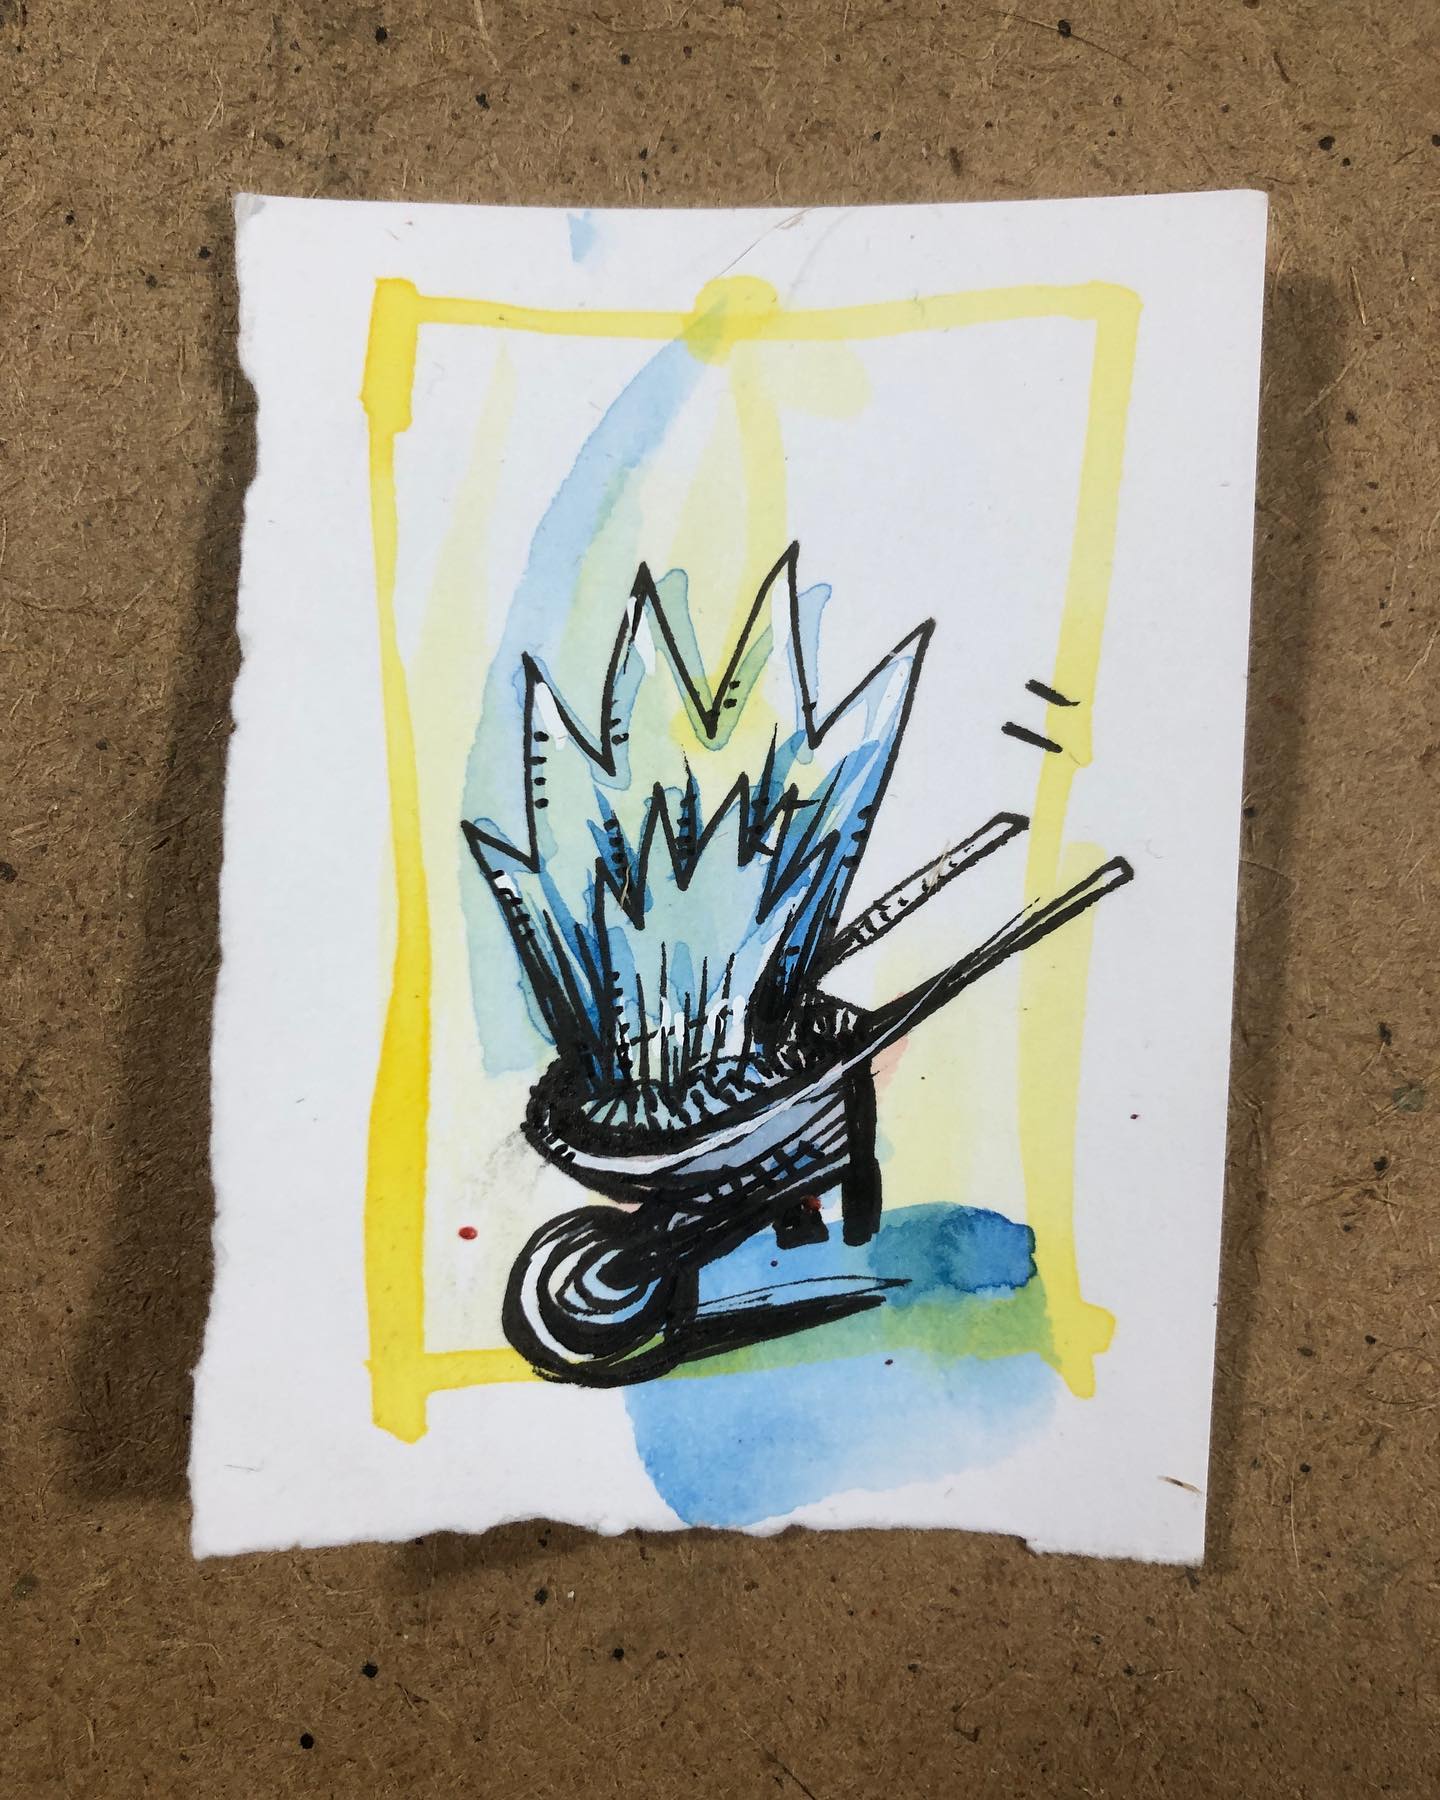 Wheelbarrow Full of Zazz - tiny ink and watercolor drawing of a wheelbarrow transporting a blazing inferno and/or explosion